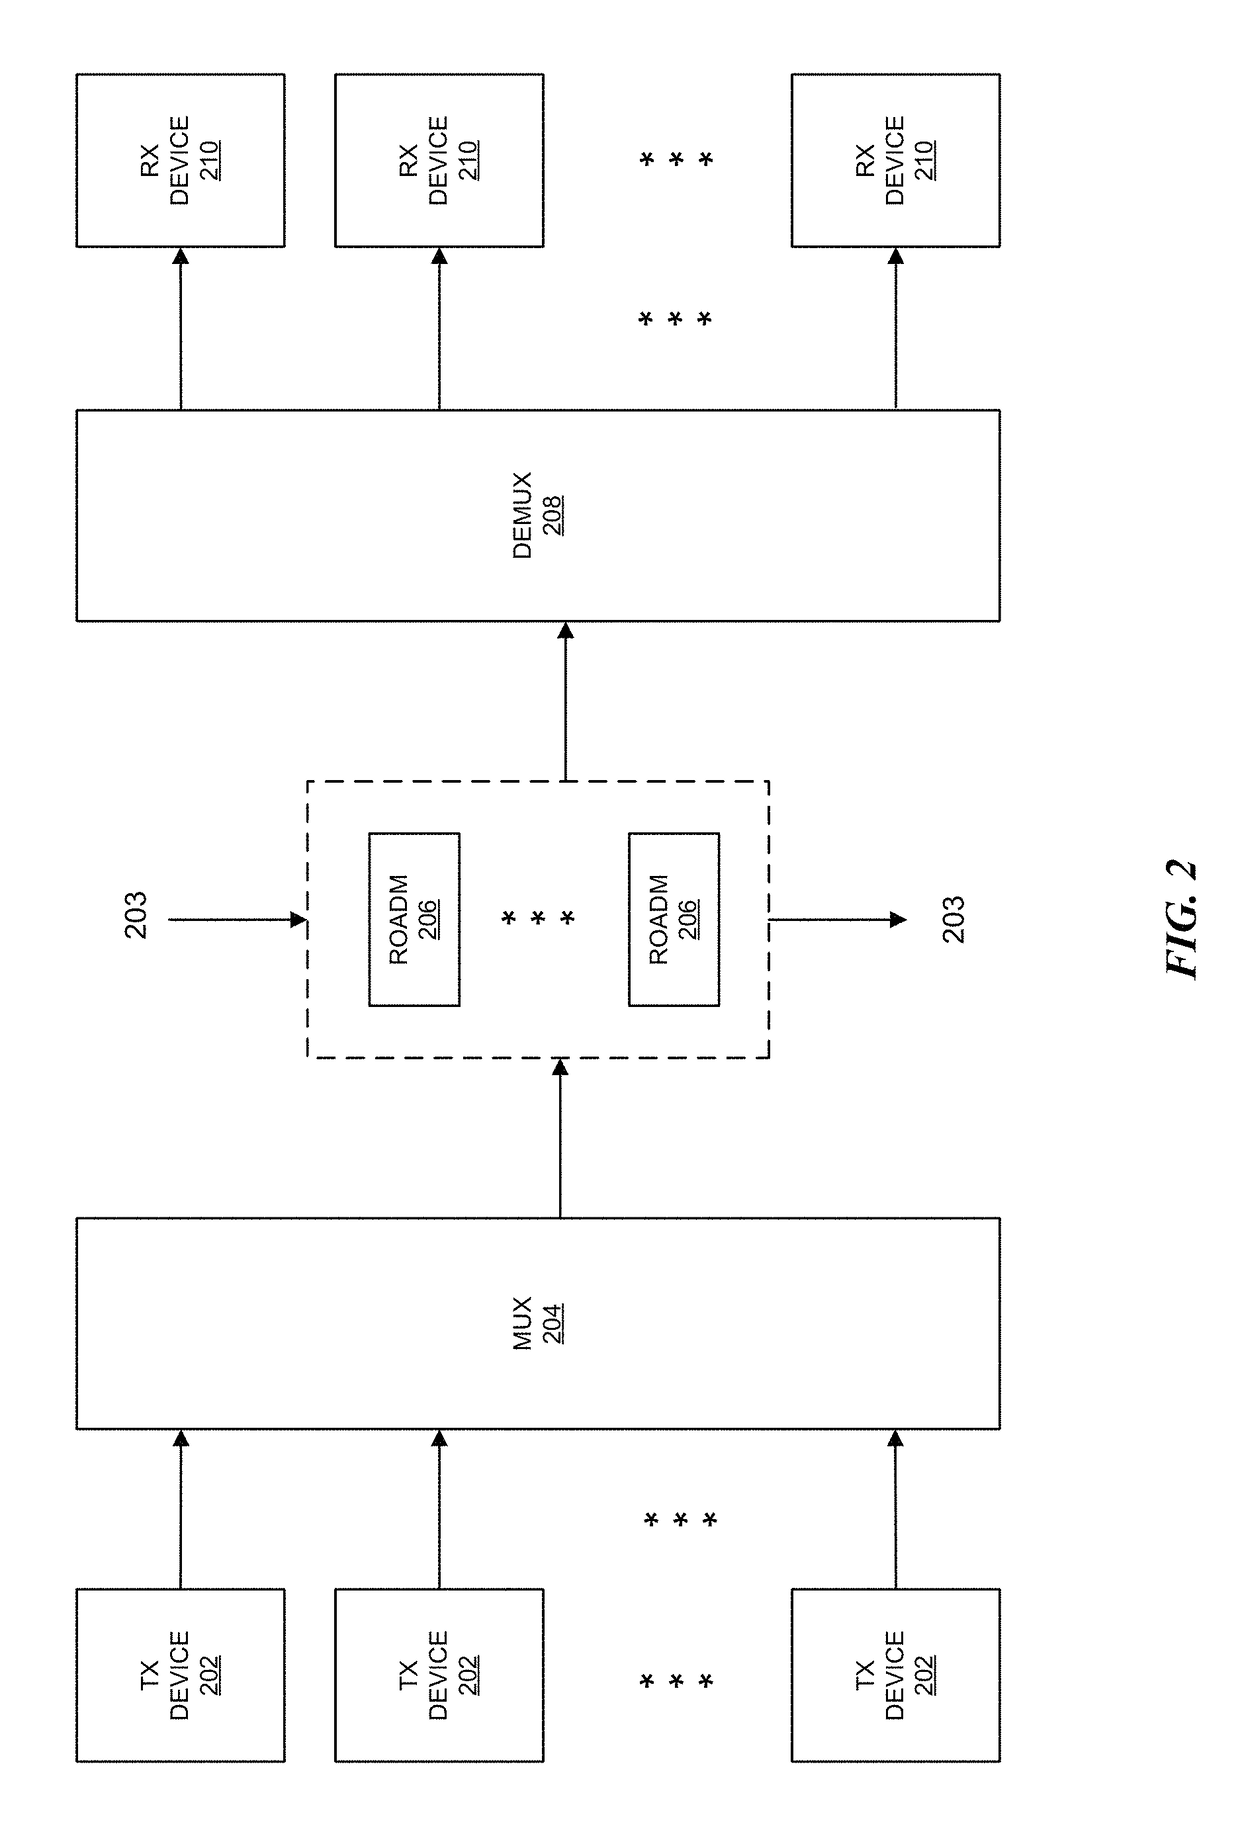 Method and apparatus for efficient network utilization using superchannels